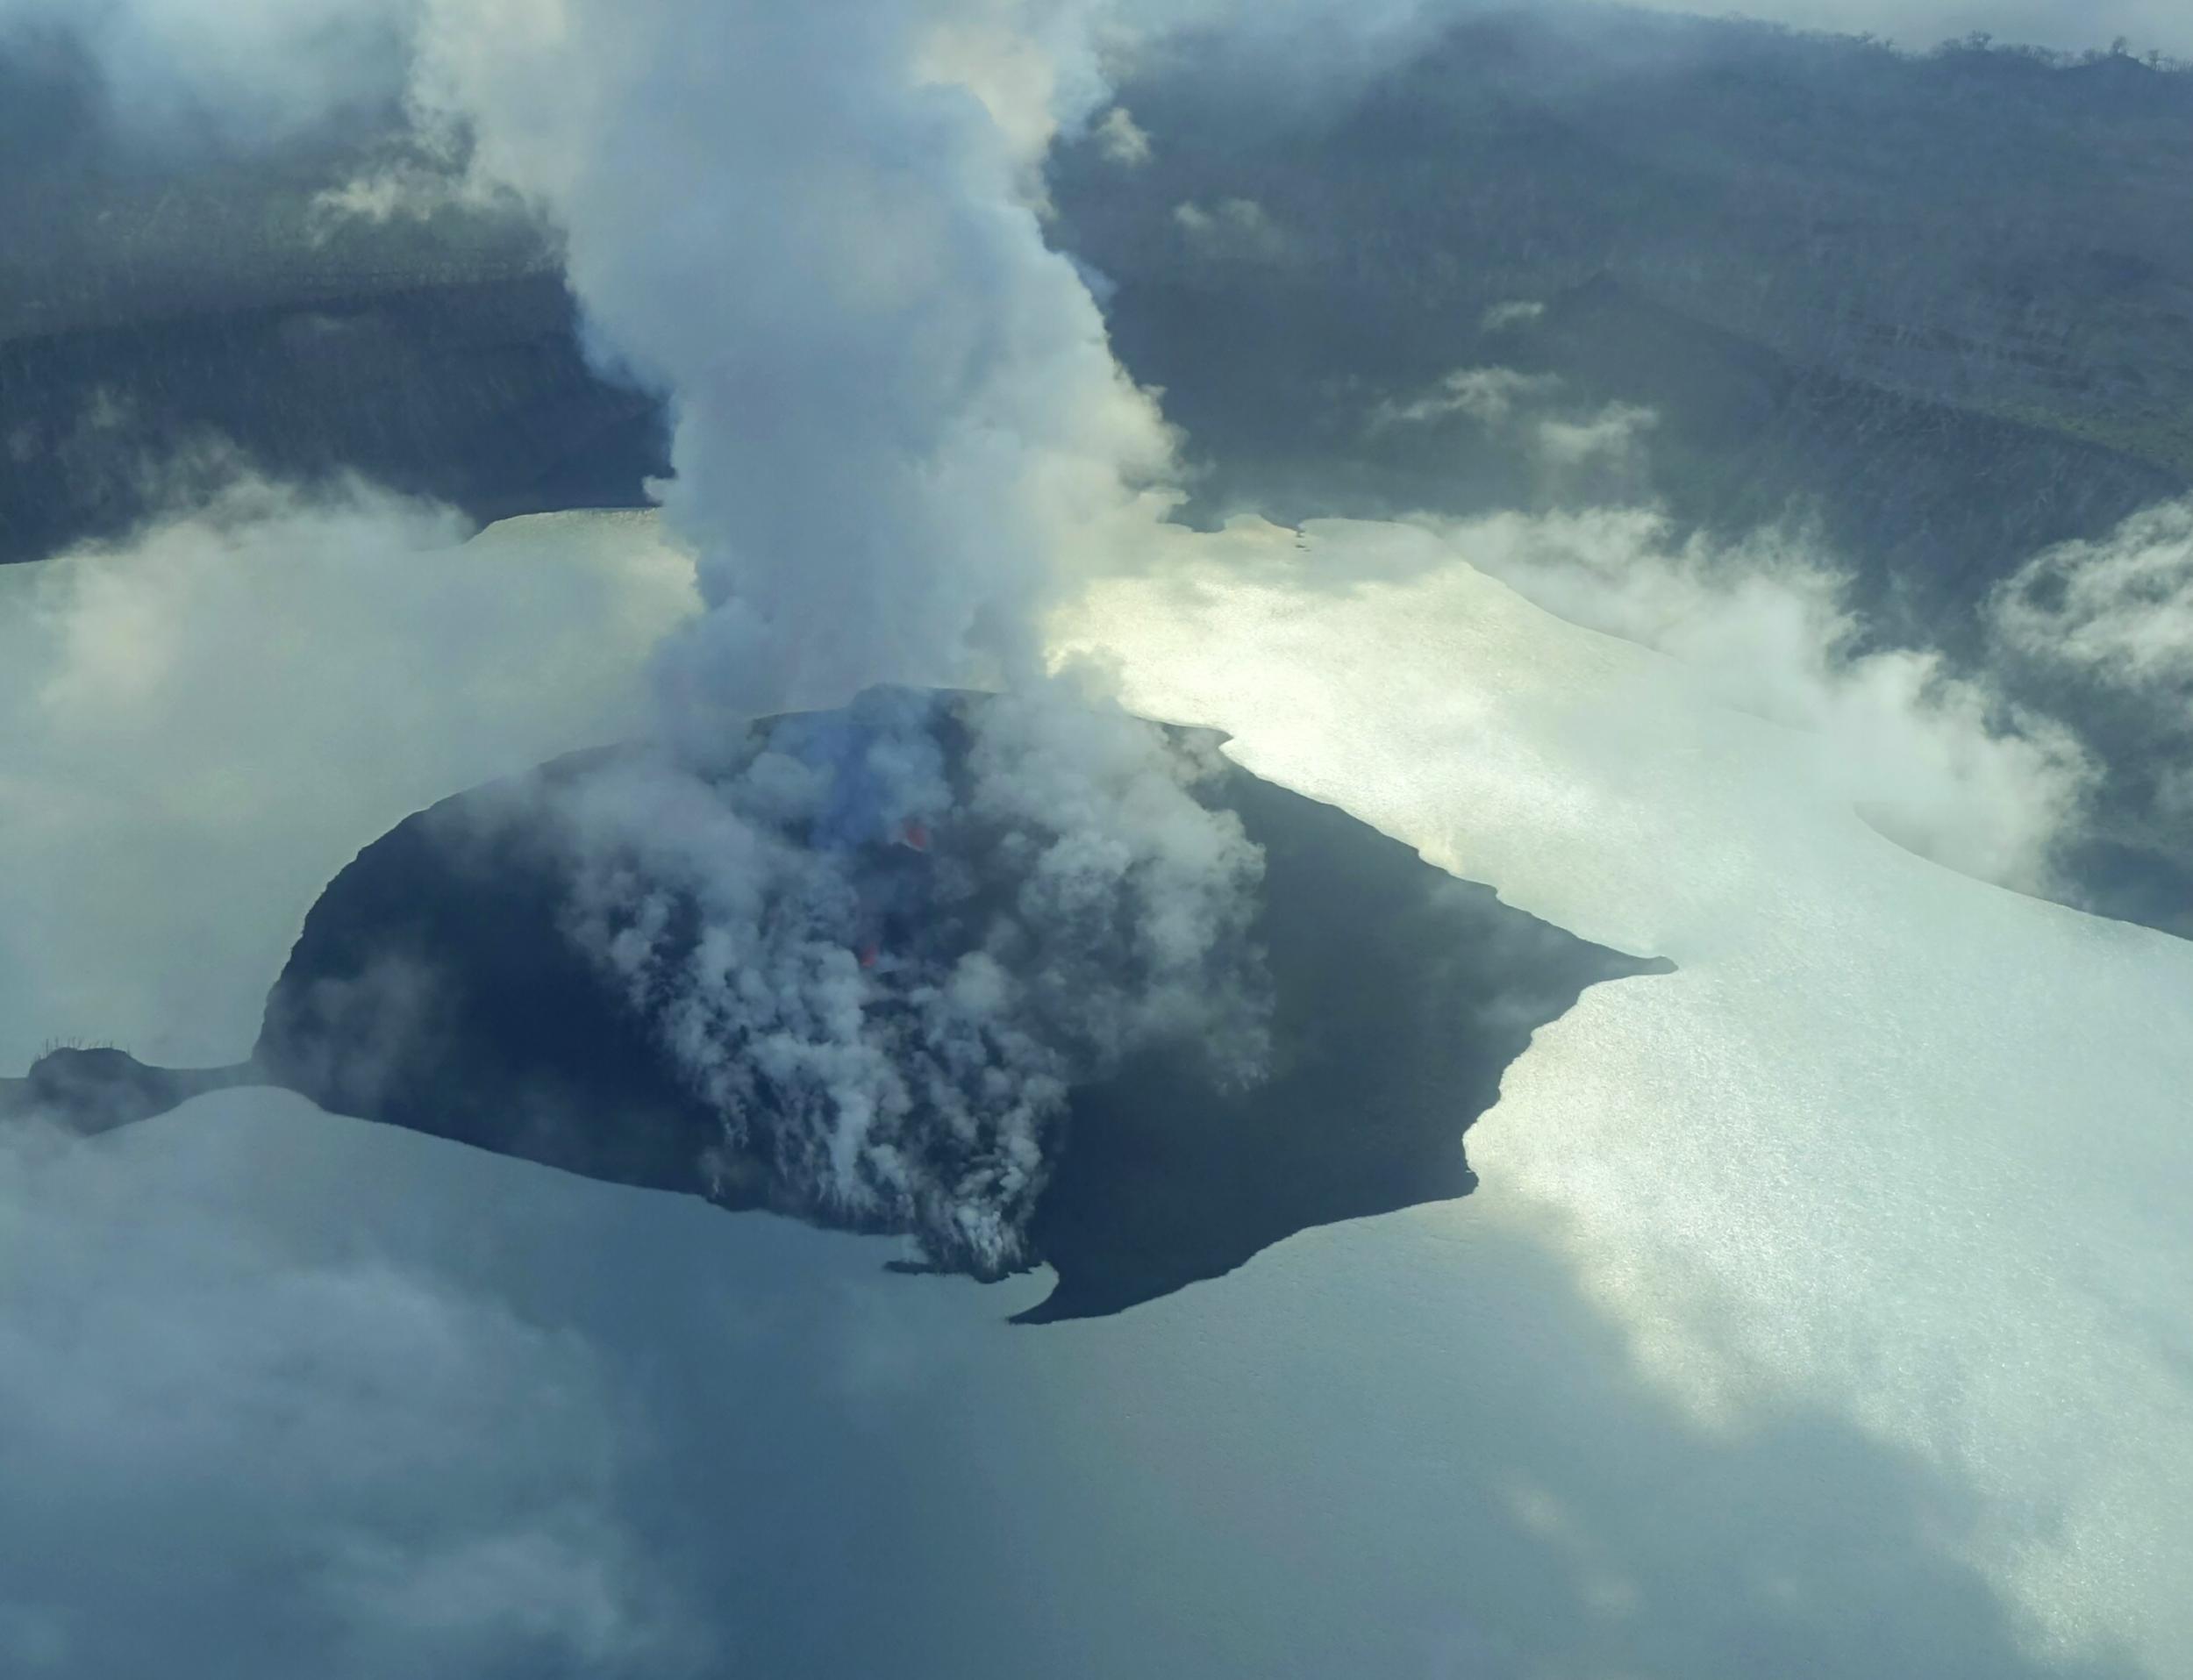 The island of Ambae on Vanatu was evacuated in September after these photos showed significant seismic activity